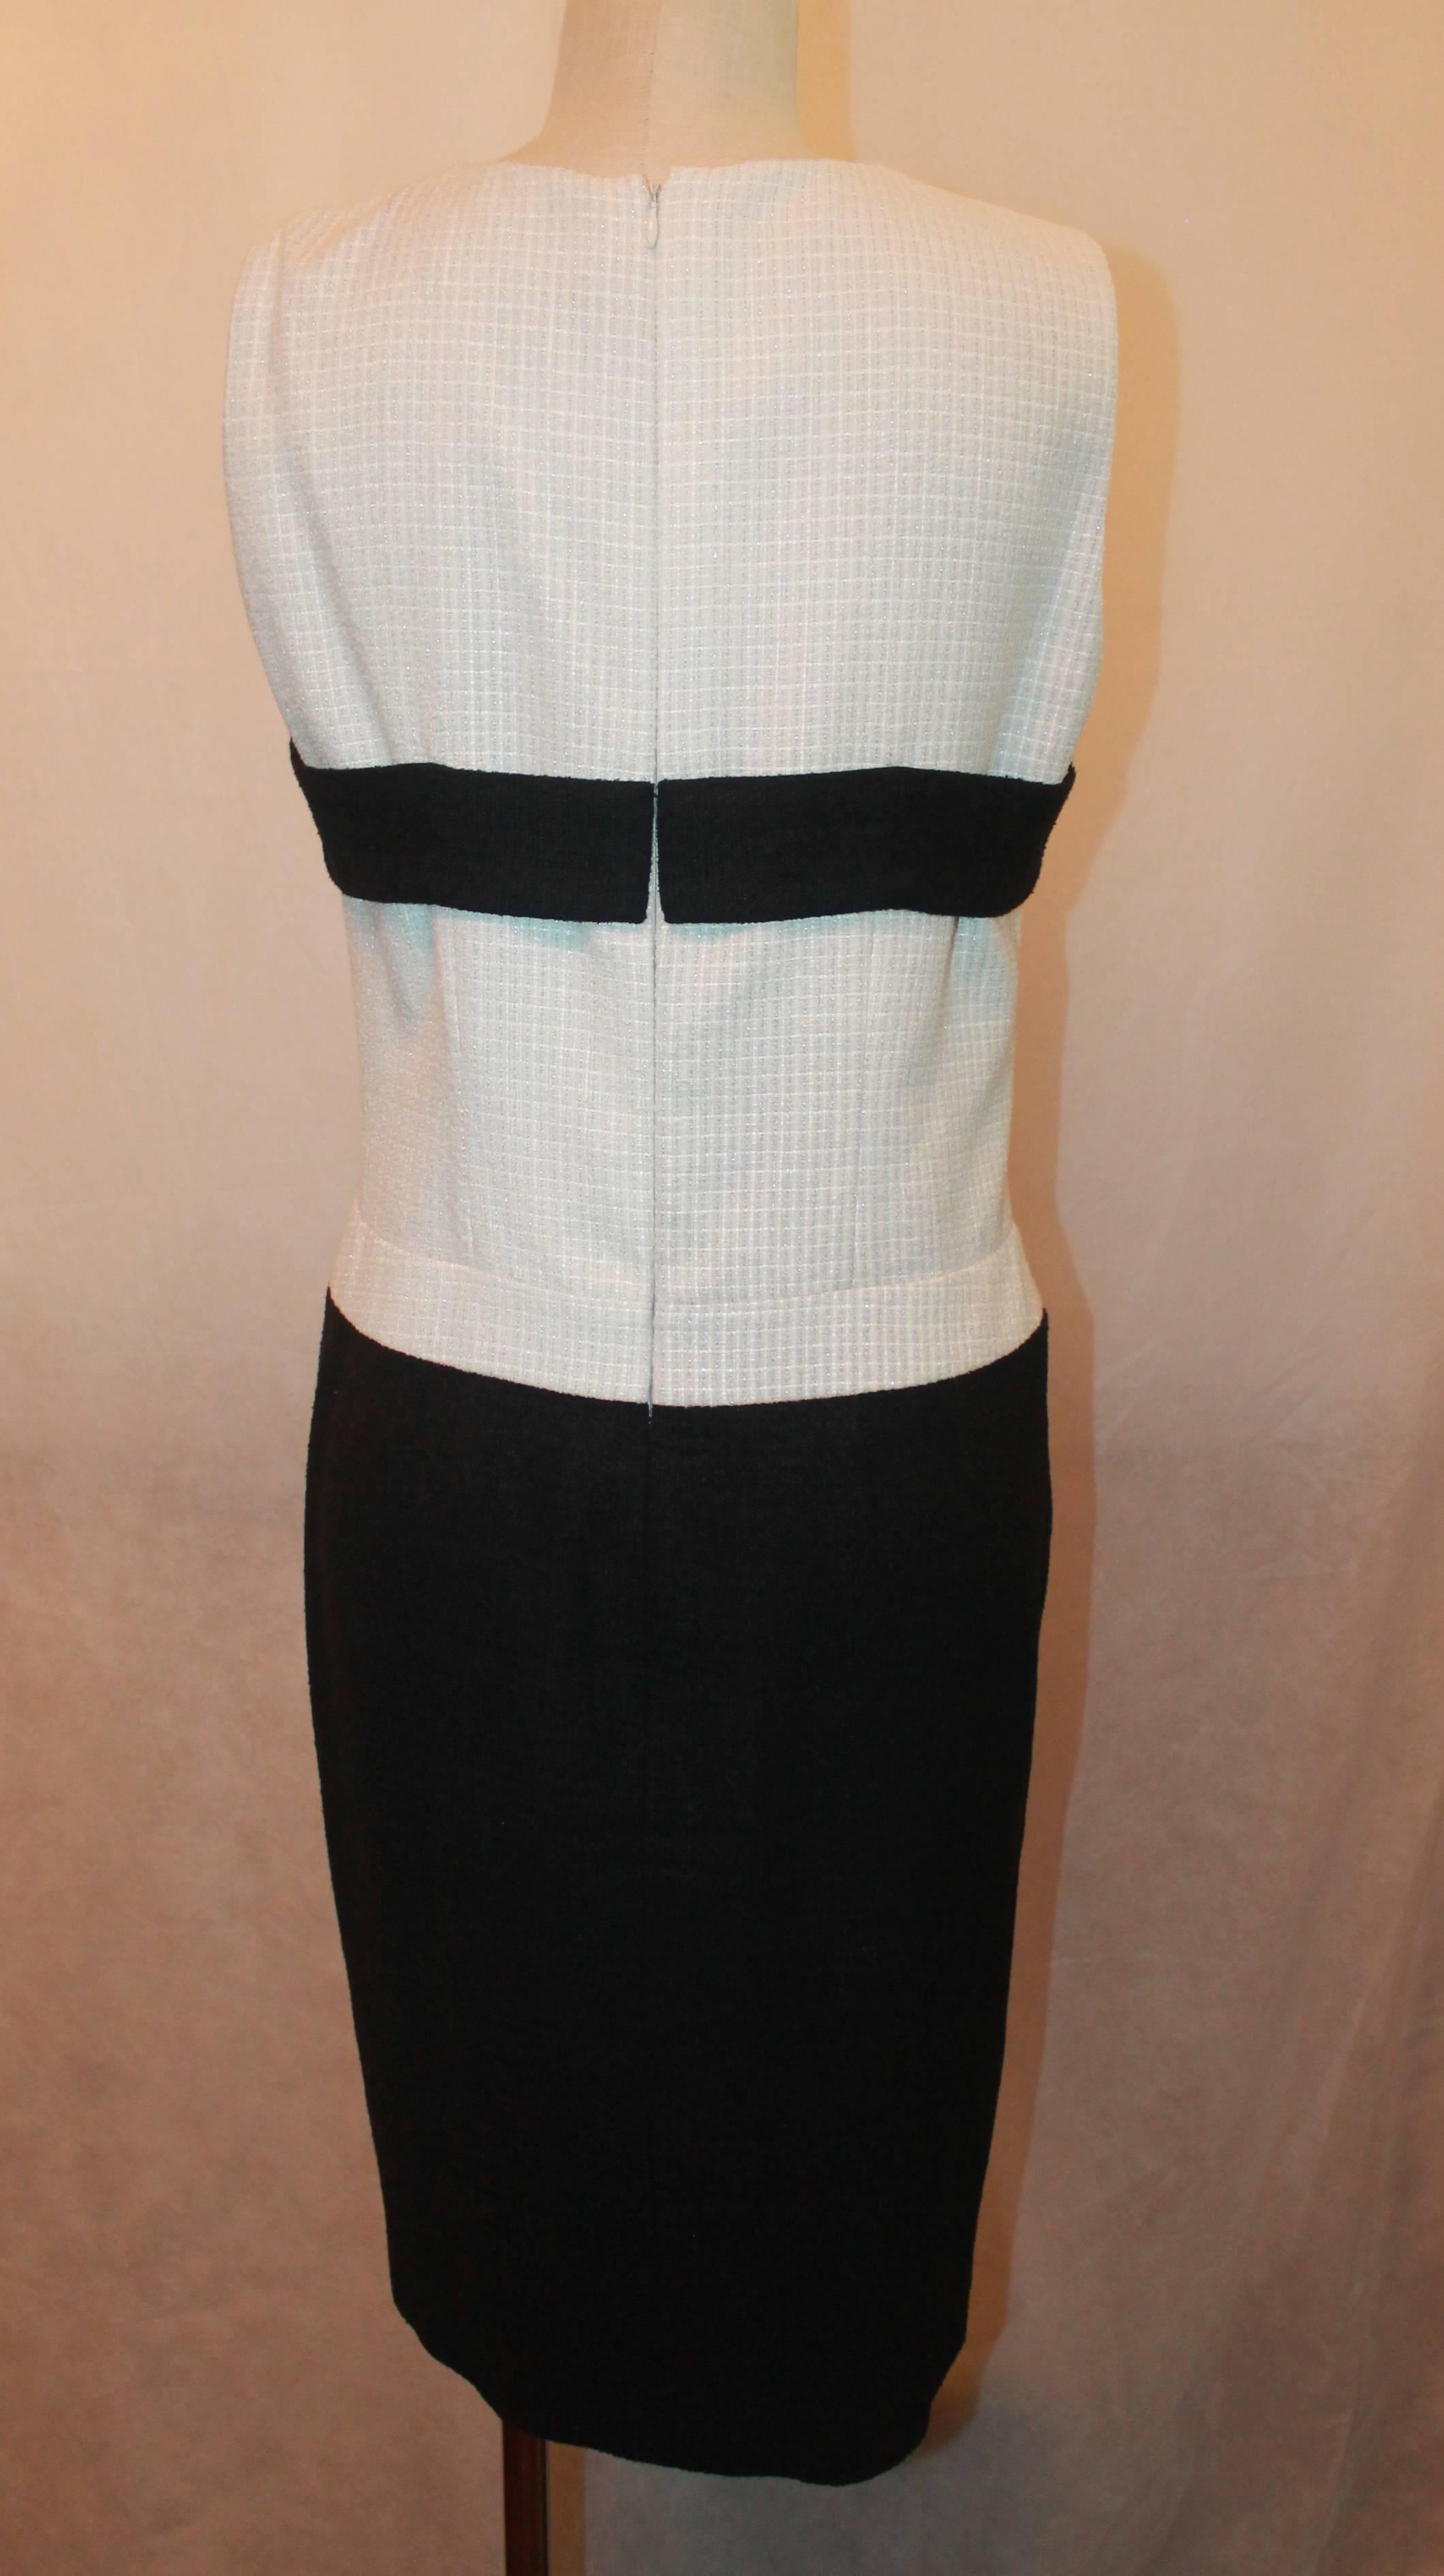 Beige Chanel 2009 Black & White Tweed Sleeveless Dress with Front Bow - 42